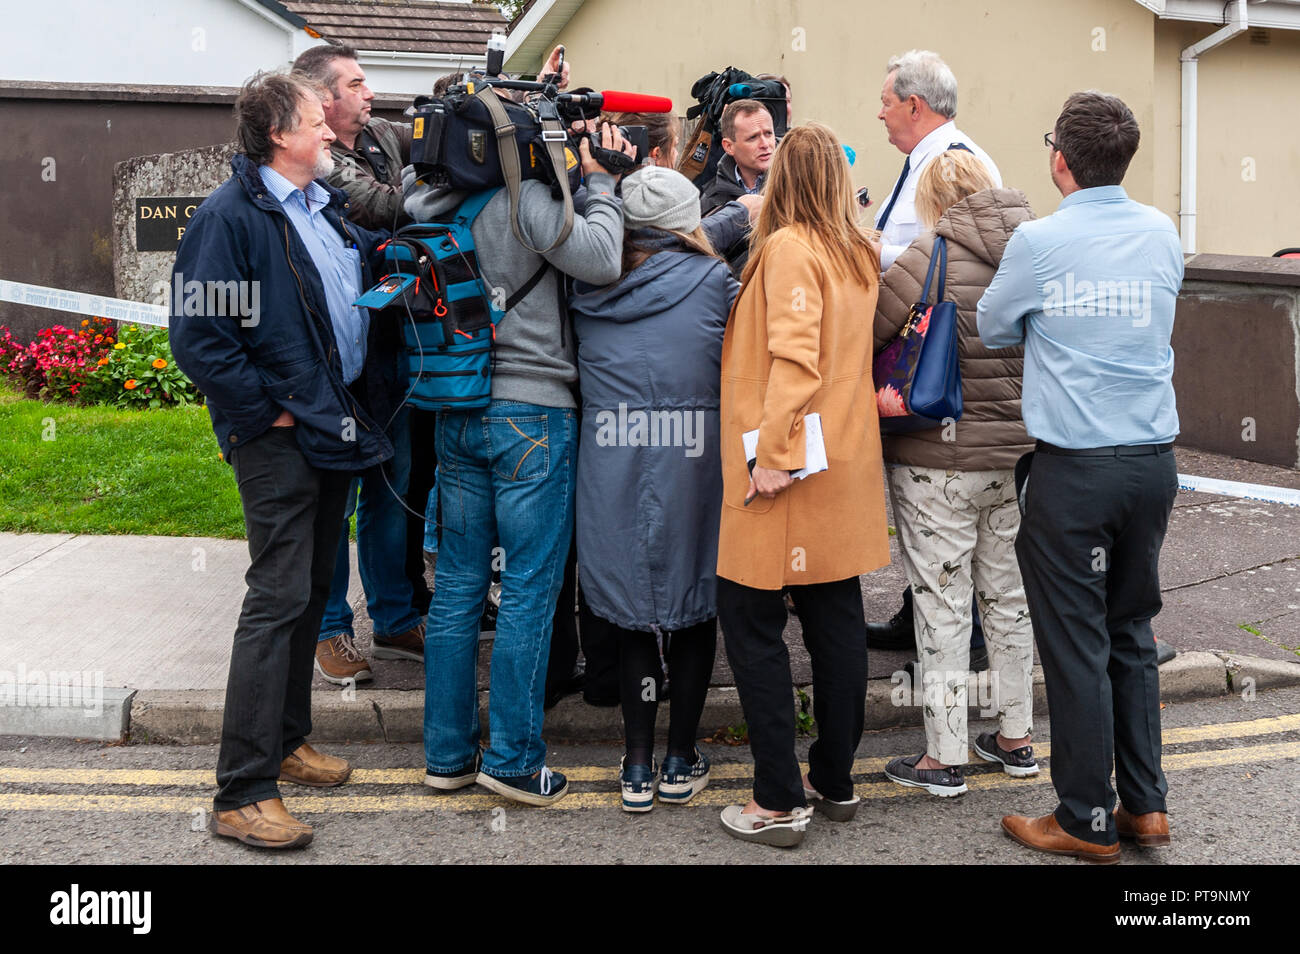 Macroom, West Cork, Ireland. 8th Oct, 2018. Garda Superintendent Michael Fitzpatrick from Macroom Garda Station gives a press conference at the scene of a fatal stabbing in Dan Corkery Place, Macroom. The State Pathologist is due on the scene at 4pm today. Credit: AG News/Alamy Live News. Stock Photo